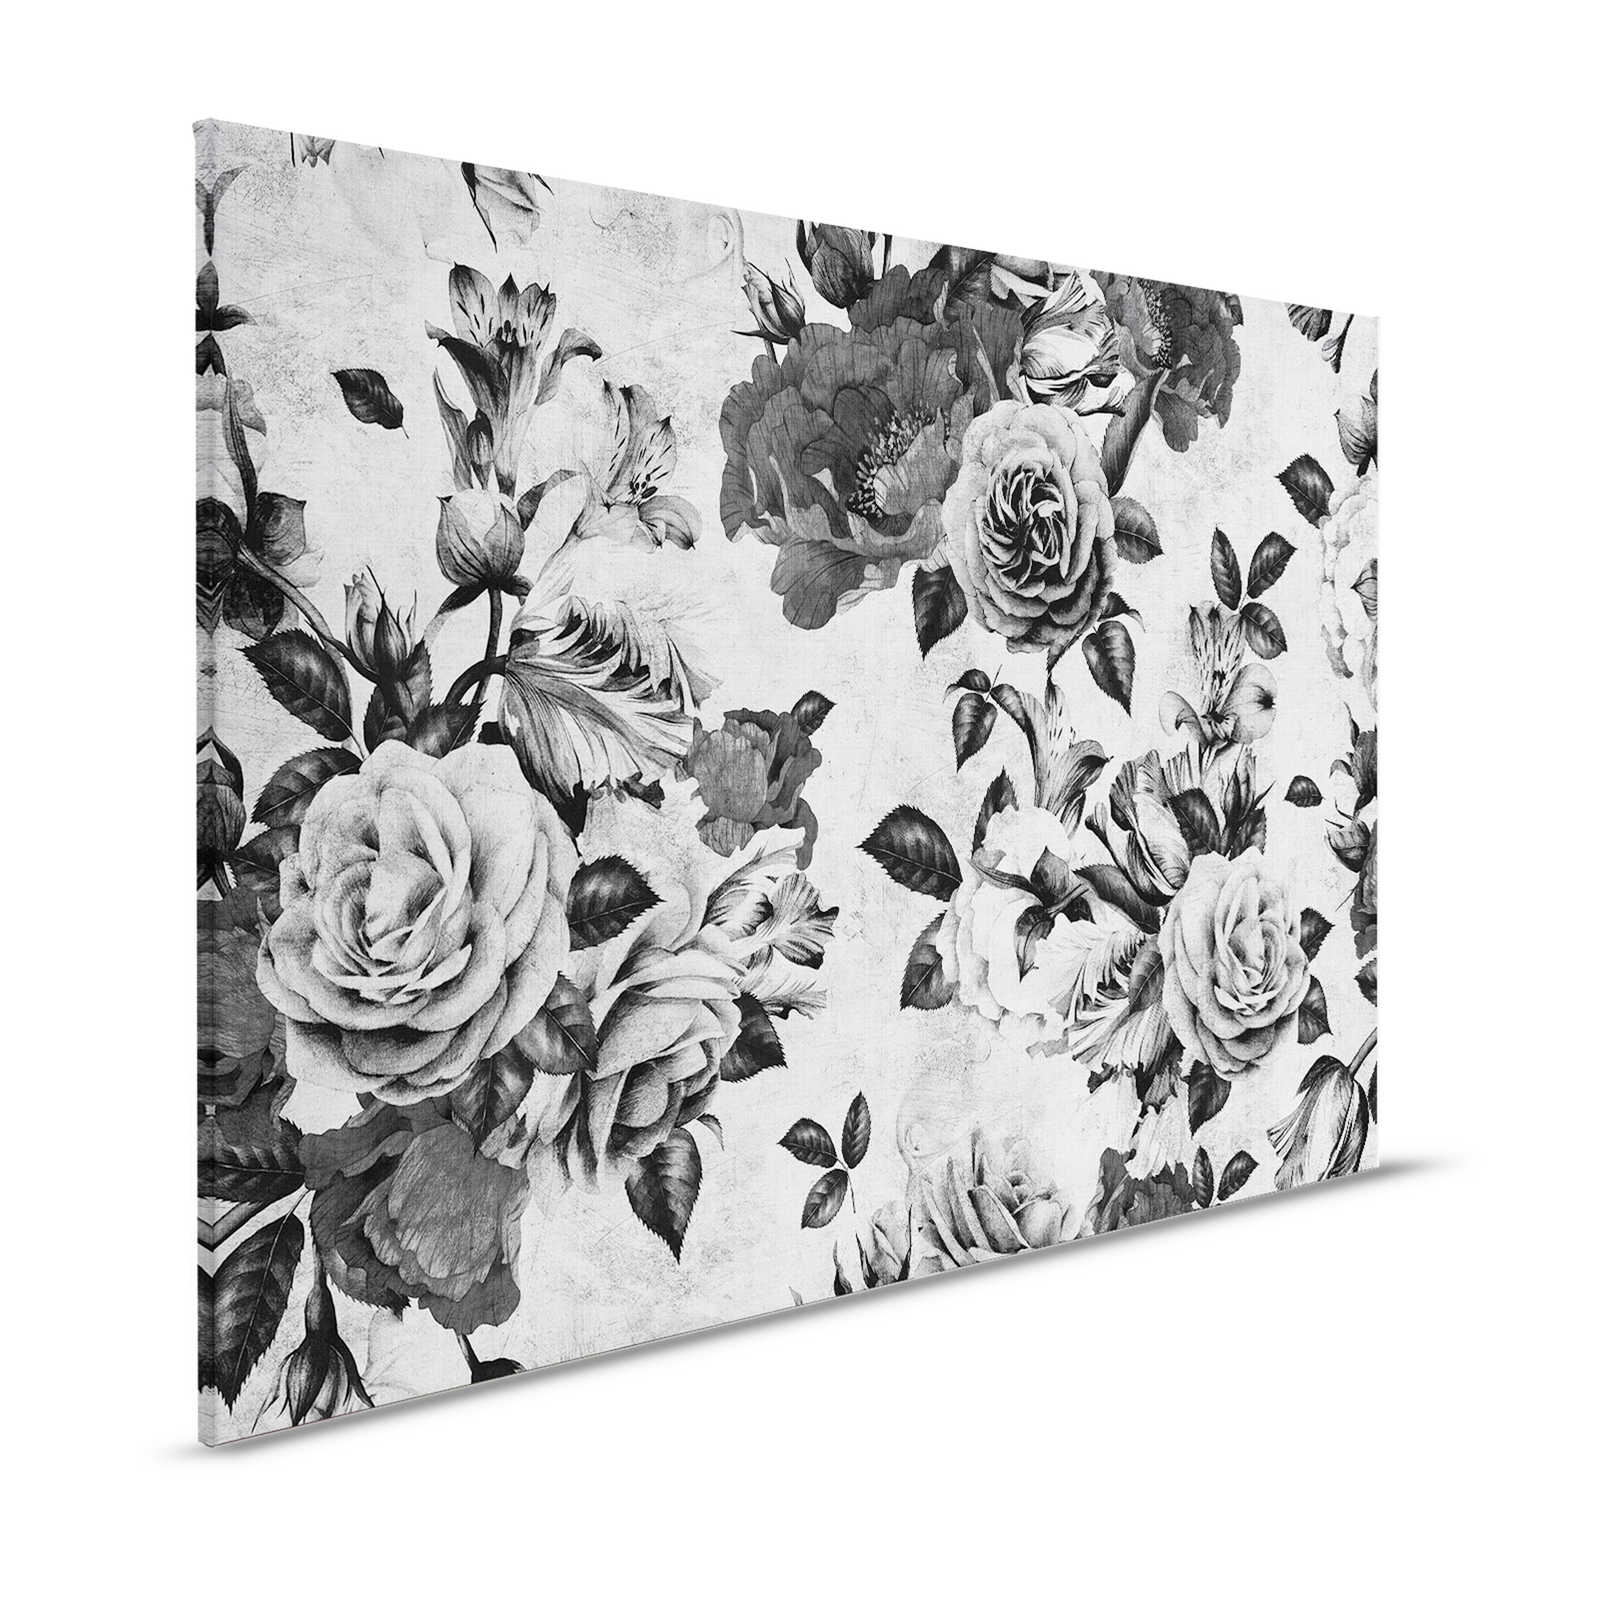 Spanish rose 1 - Roses canvas painting with black and white flowers - 1,20 m x 0,80 m
